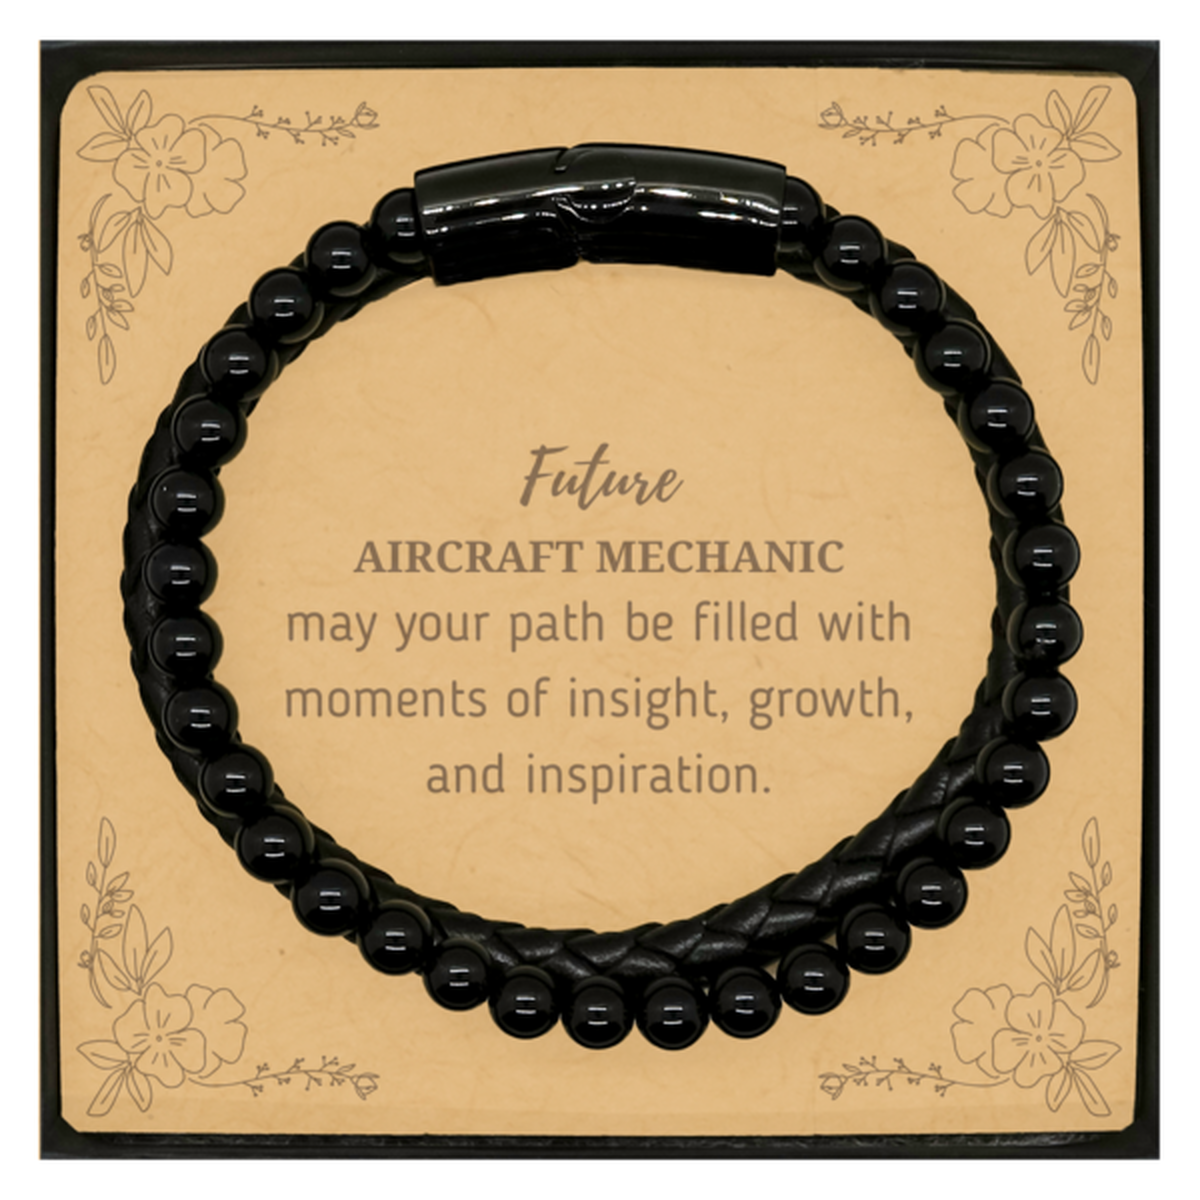 Future Aircraft Mechanic Gifts, May your path be filled with moments of insight, Graduation Gifts for New Aircraft Mechanic, Christmas Unique Stone Leather Bracelets For Men, Women, Friends